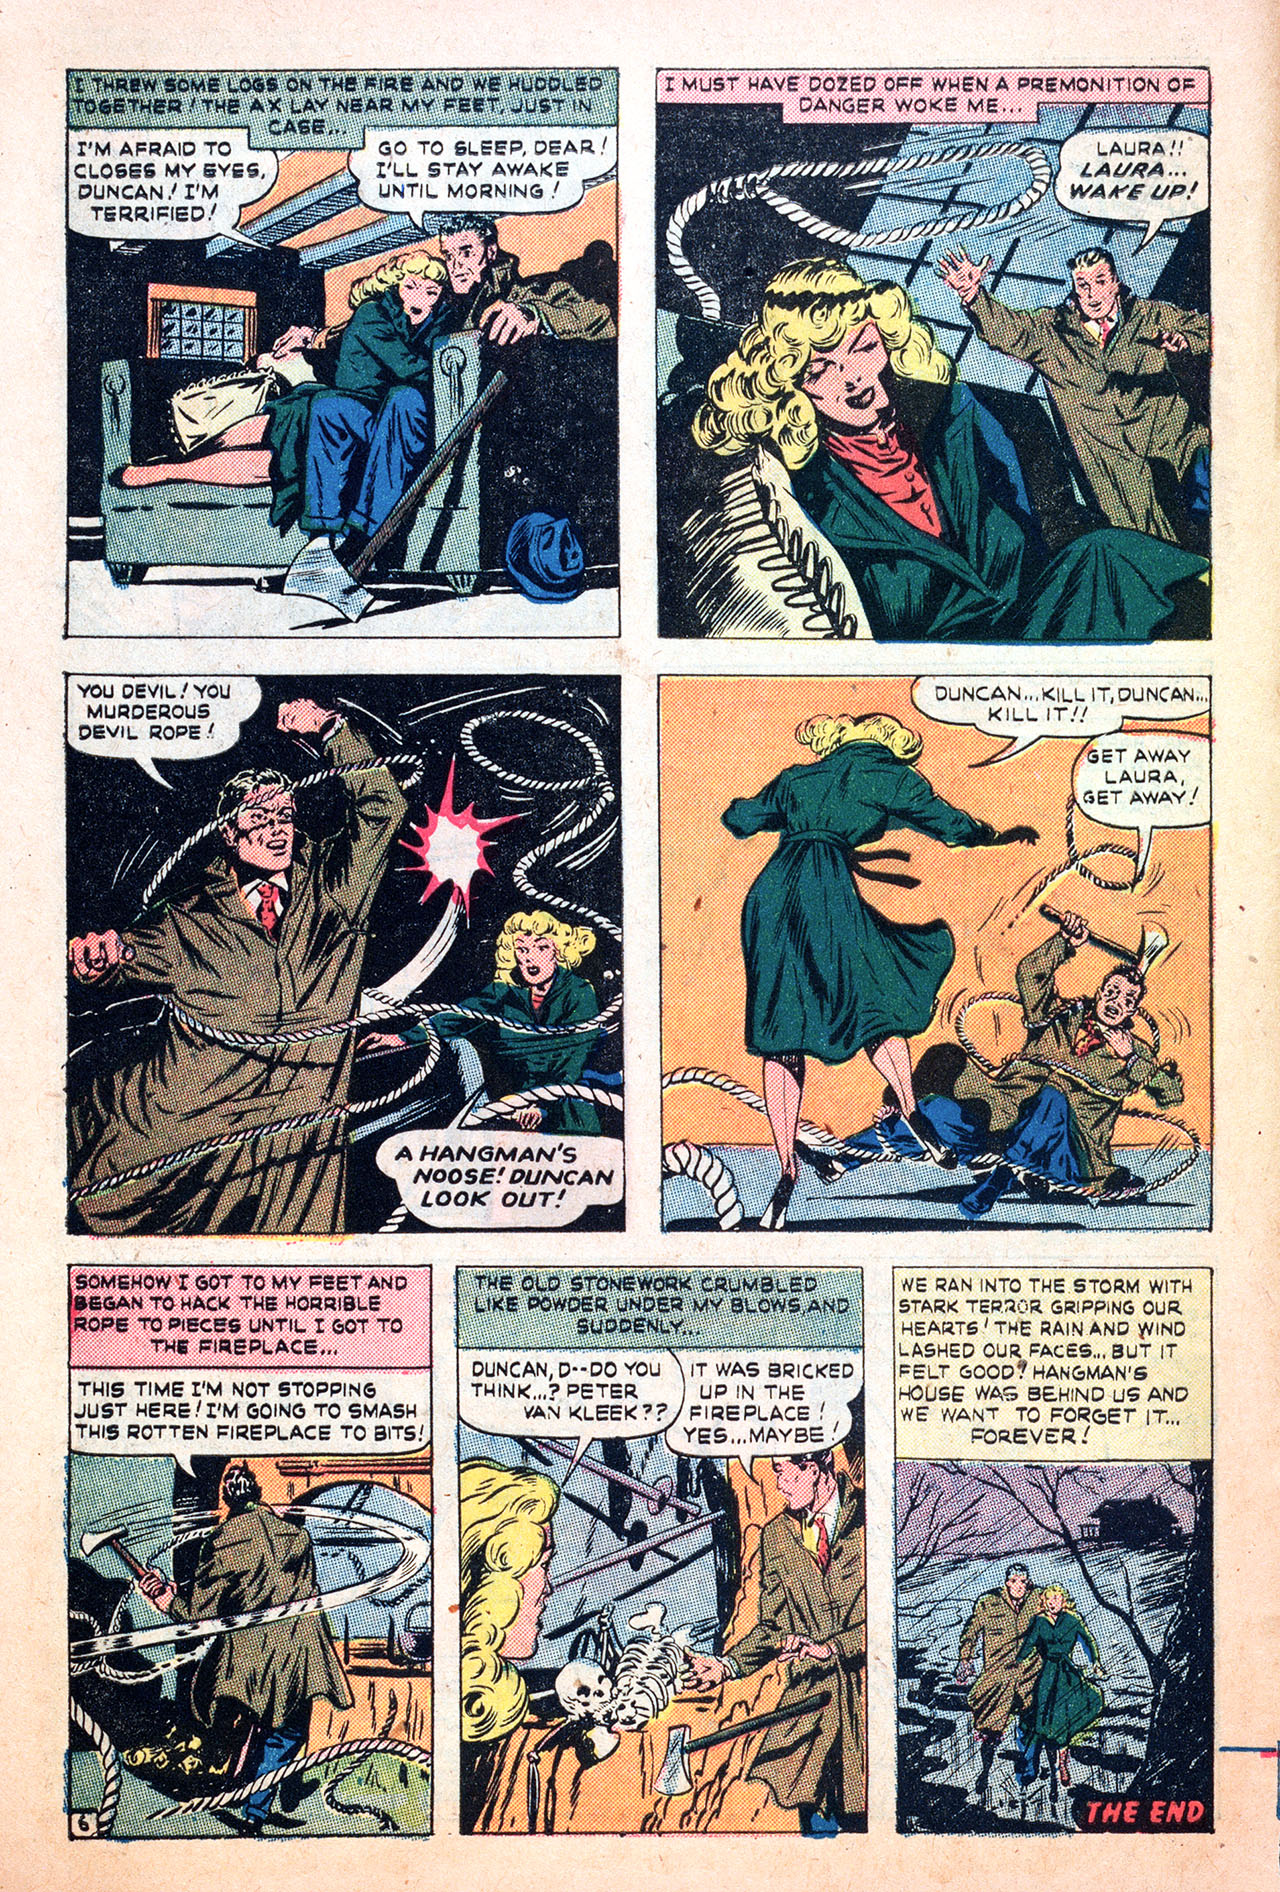 Marvel Tales (1949) 94 Page 7